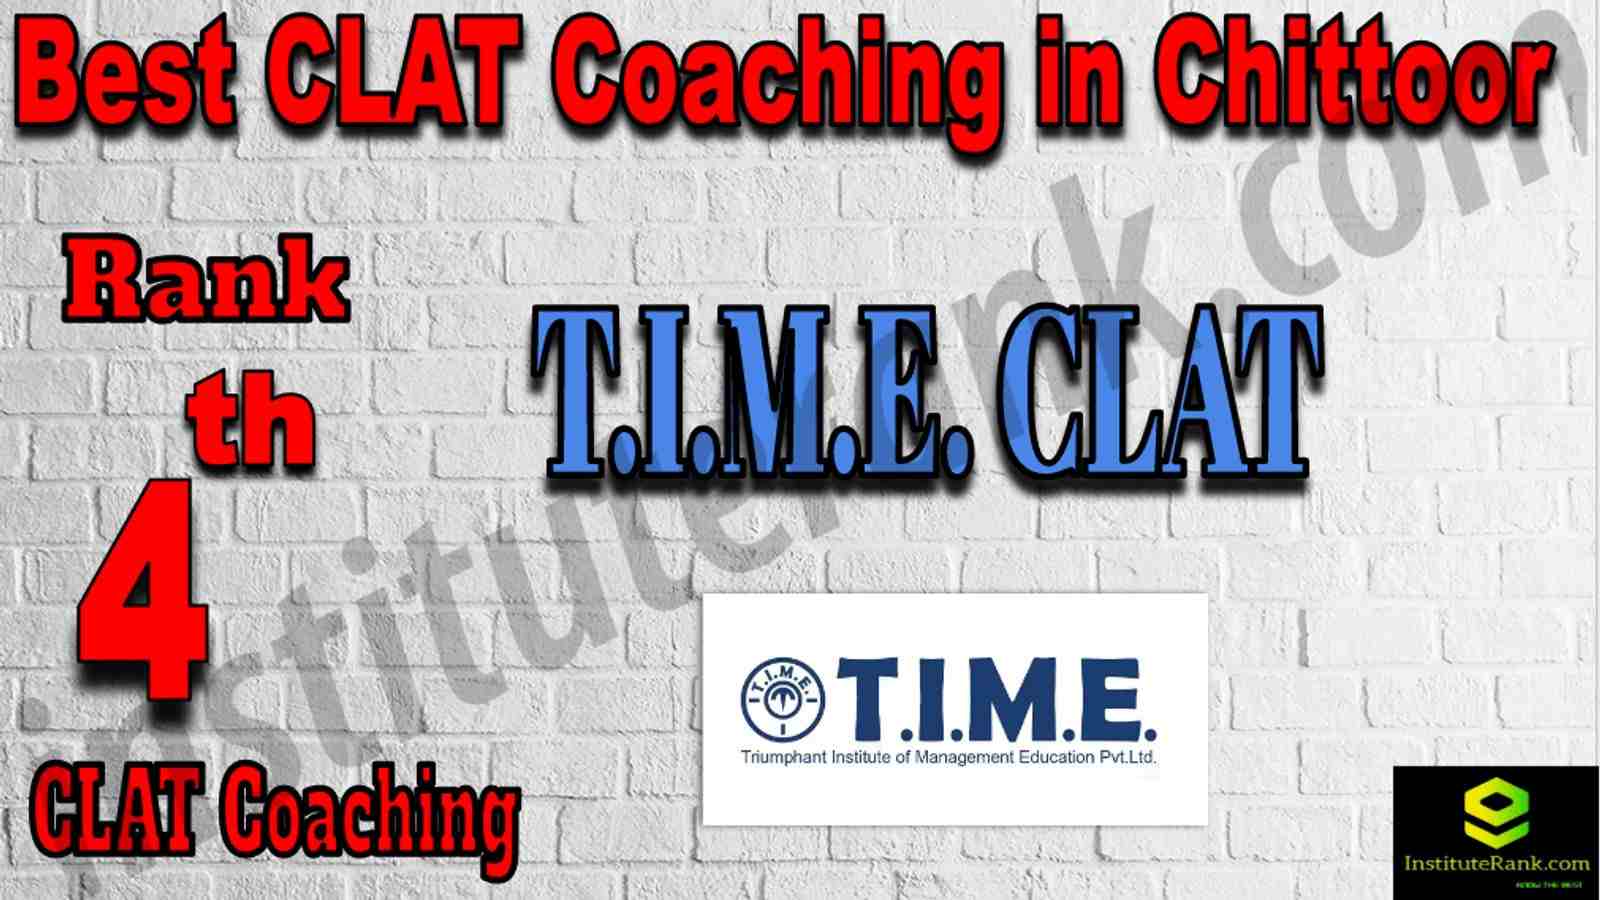 4th Best CLAT Coaching in Chittoor